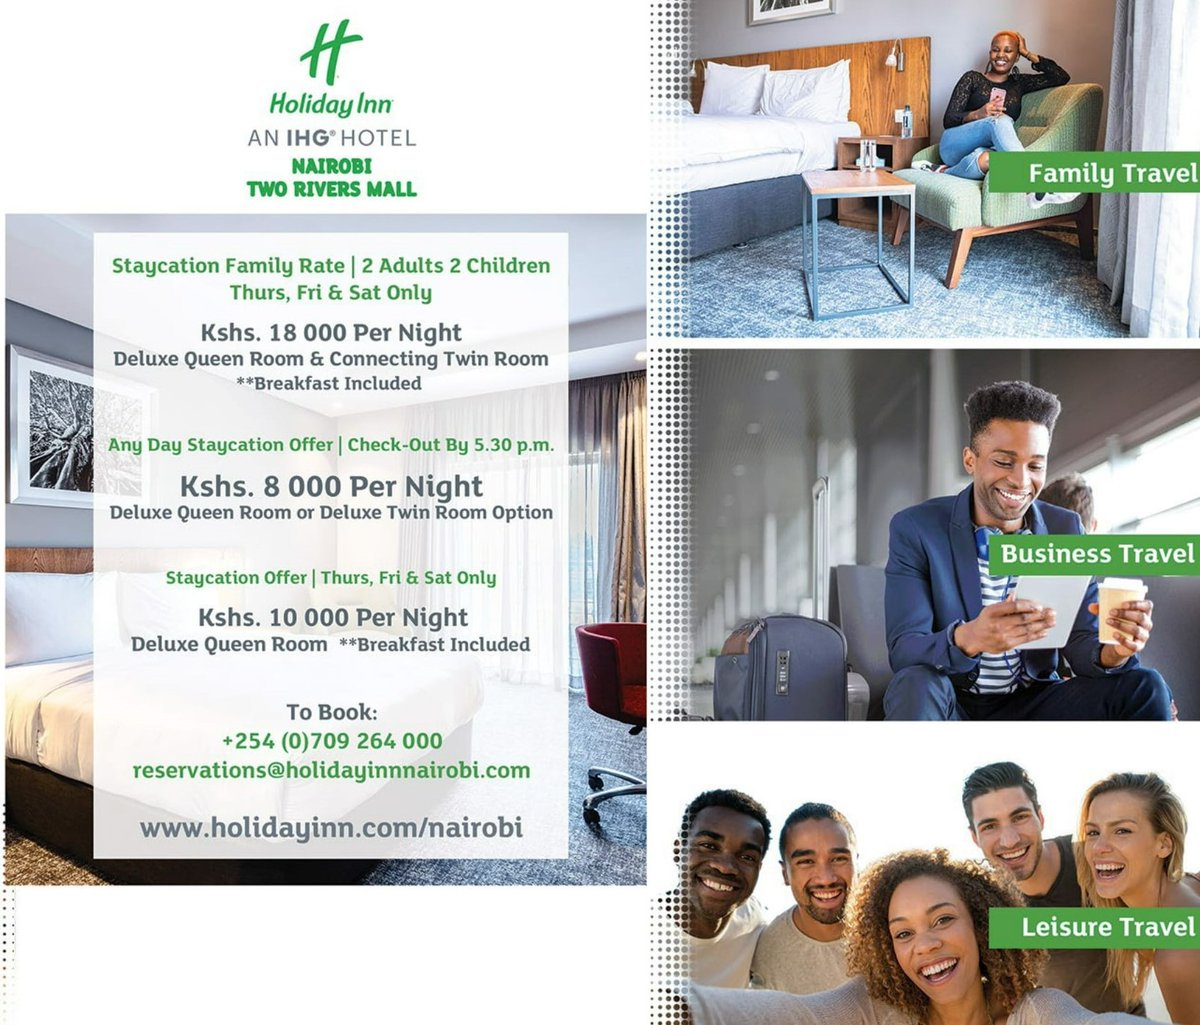 Get ready to start the new month - refreshed and relaxed 😎 
▫️ Time to book your staycation and cross out 'R&R time' on your bucket list.

@holiday_two

#HolidayInnNairobi   
#staycationkenya
#ExperienceIHG
#BeThereIRL  
#staycationnairobi
#staycations
#staycationkenya